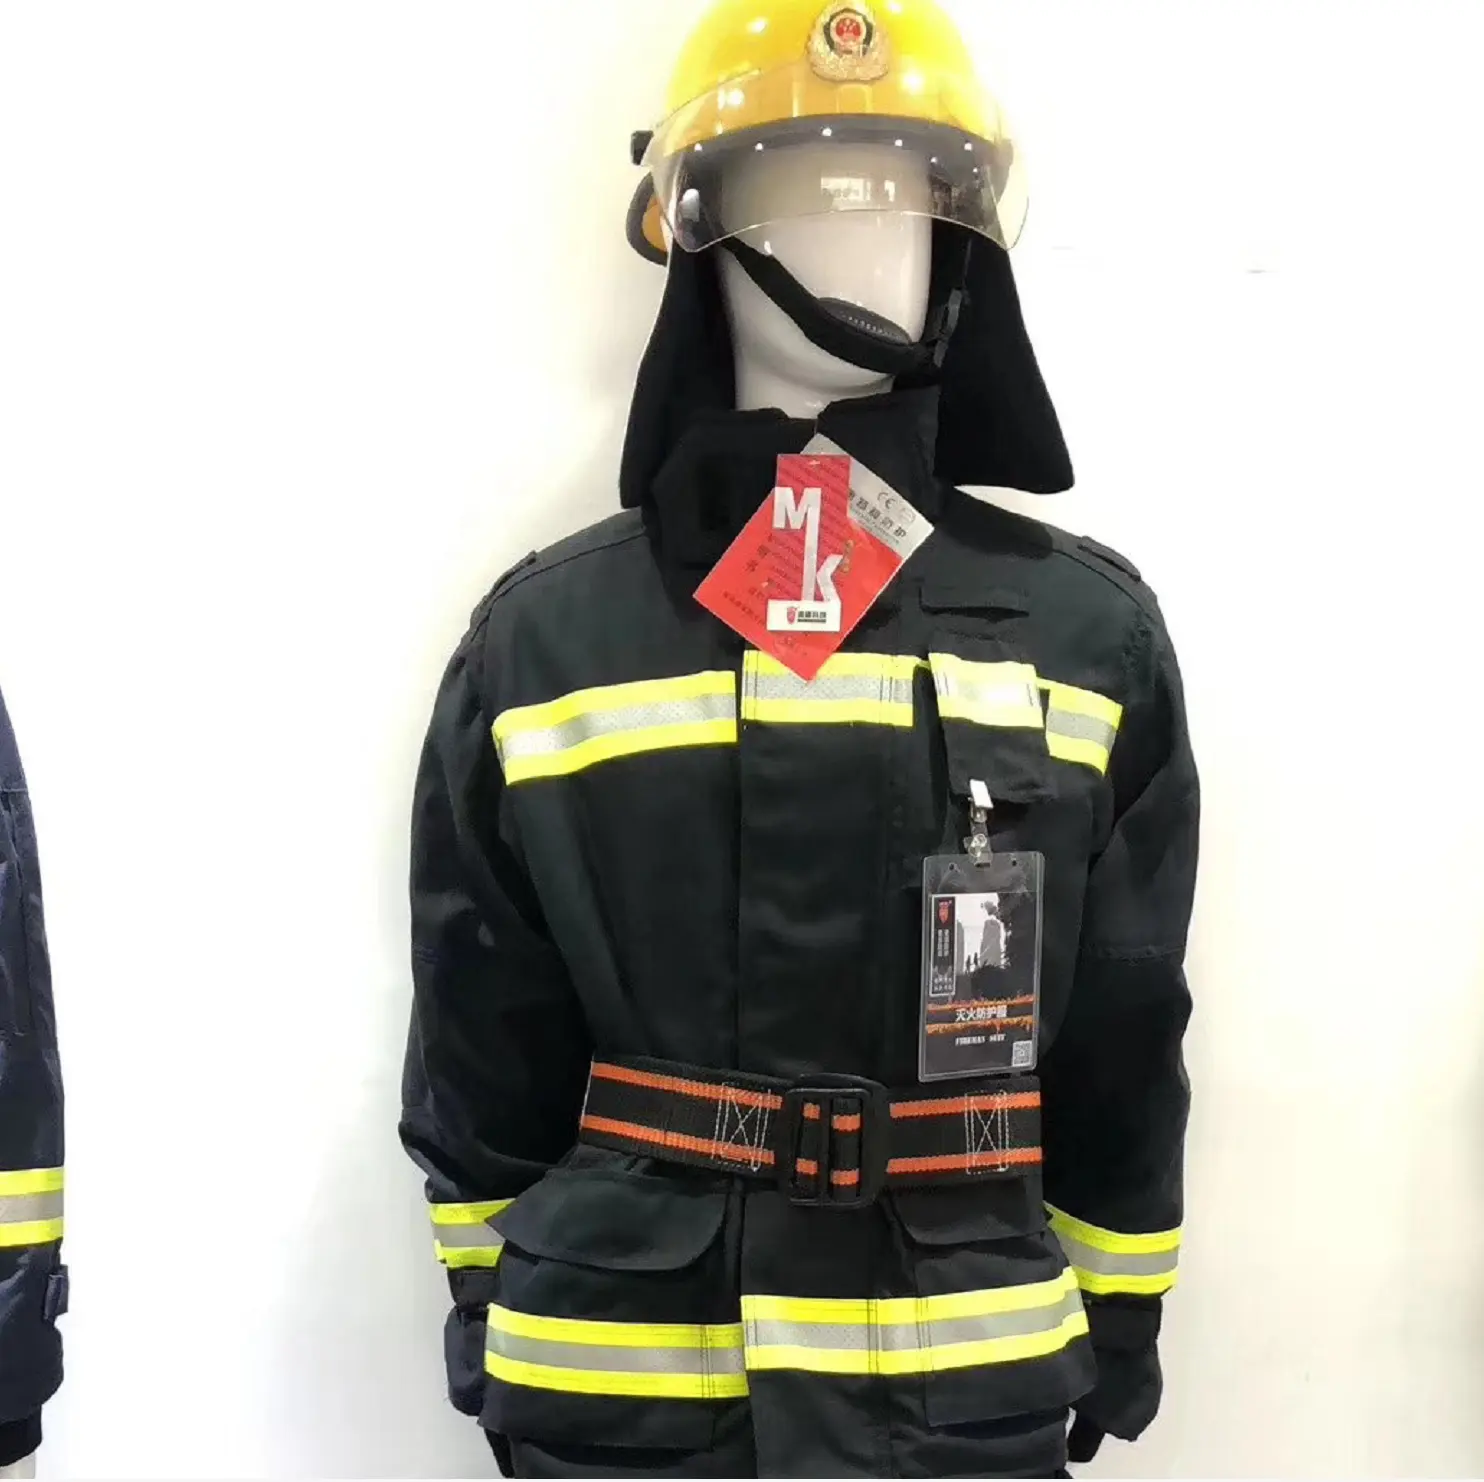 EN 469 Fire Fighter Suits Classic Navy Blue Twill Shell 4 Layers Fireman Suits Fire Fighting Firefighter Suits